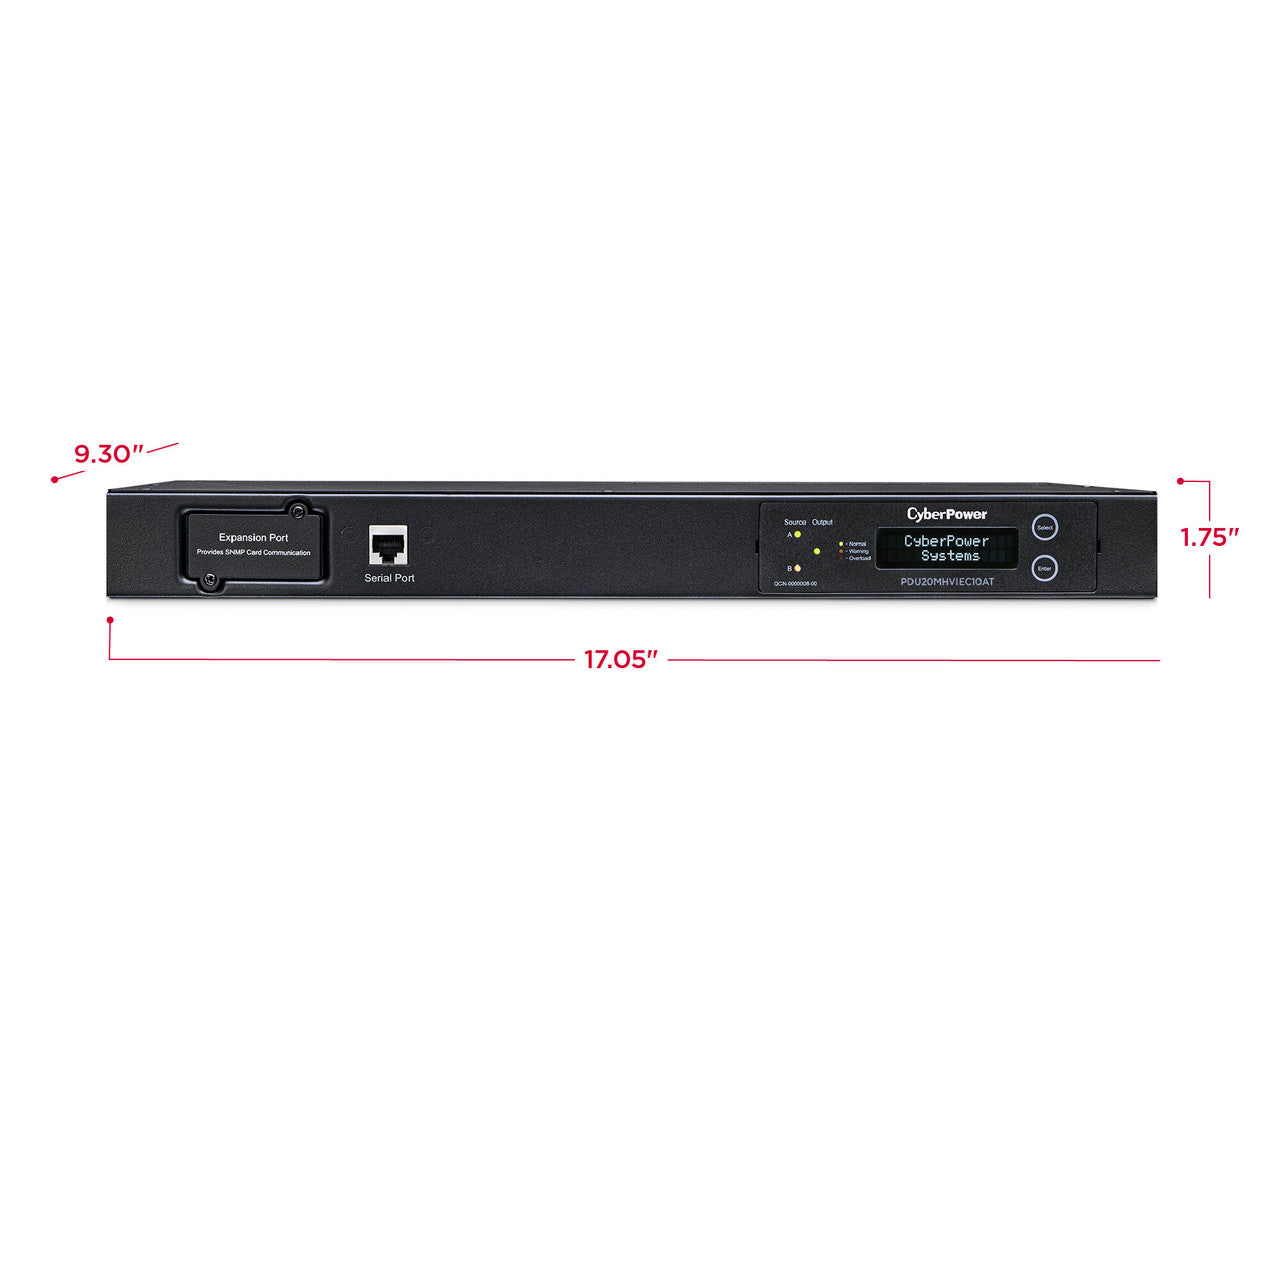 CyberPower PDU20MHVIEC10AT 20A (Derated to 16A), 200 - 240 V, 2 x IEC-320 C20 plug, 10 IEC-320 (8) C13 / (2) C19 Outlets